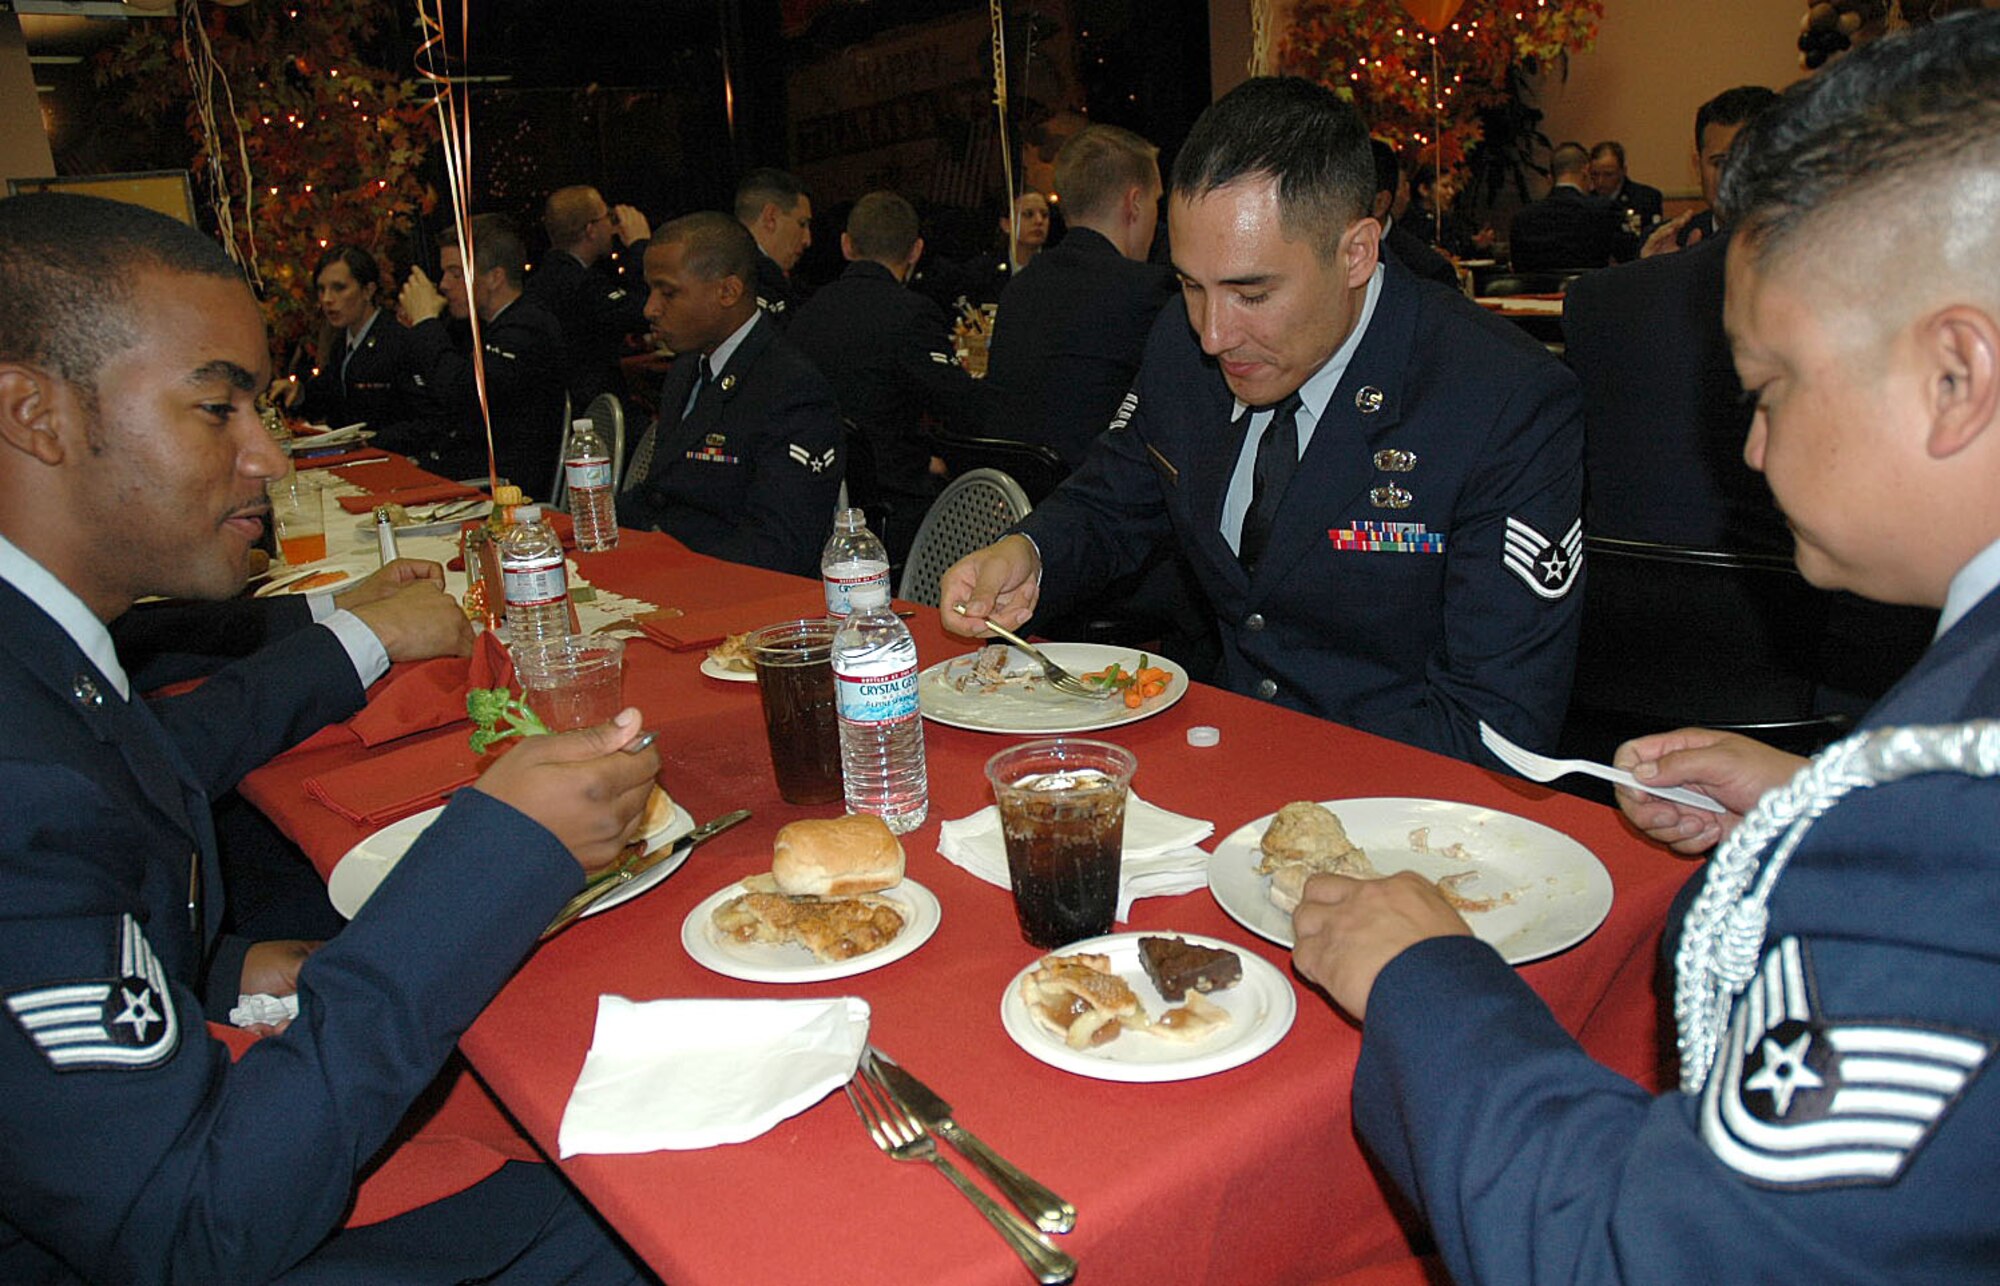 Members from Los Angeles Air Force Base enjoy a bountiful turkey dinner provided by Jay Leno’s staff after NBC’s military tribute on Thanksgiving Day, Nov. 26. The participants came from various military bases around Southern California to be a part of the all-military audience for this annual event held at NBC Studios in Burbank, Calif. (Photo by 2nd Lt. Mara Title)